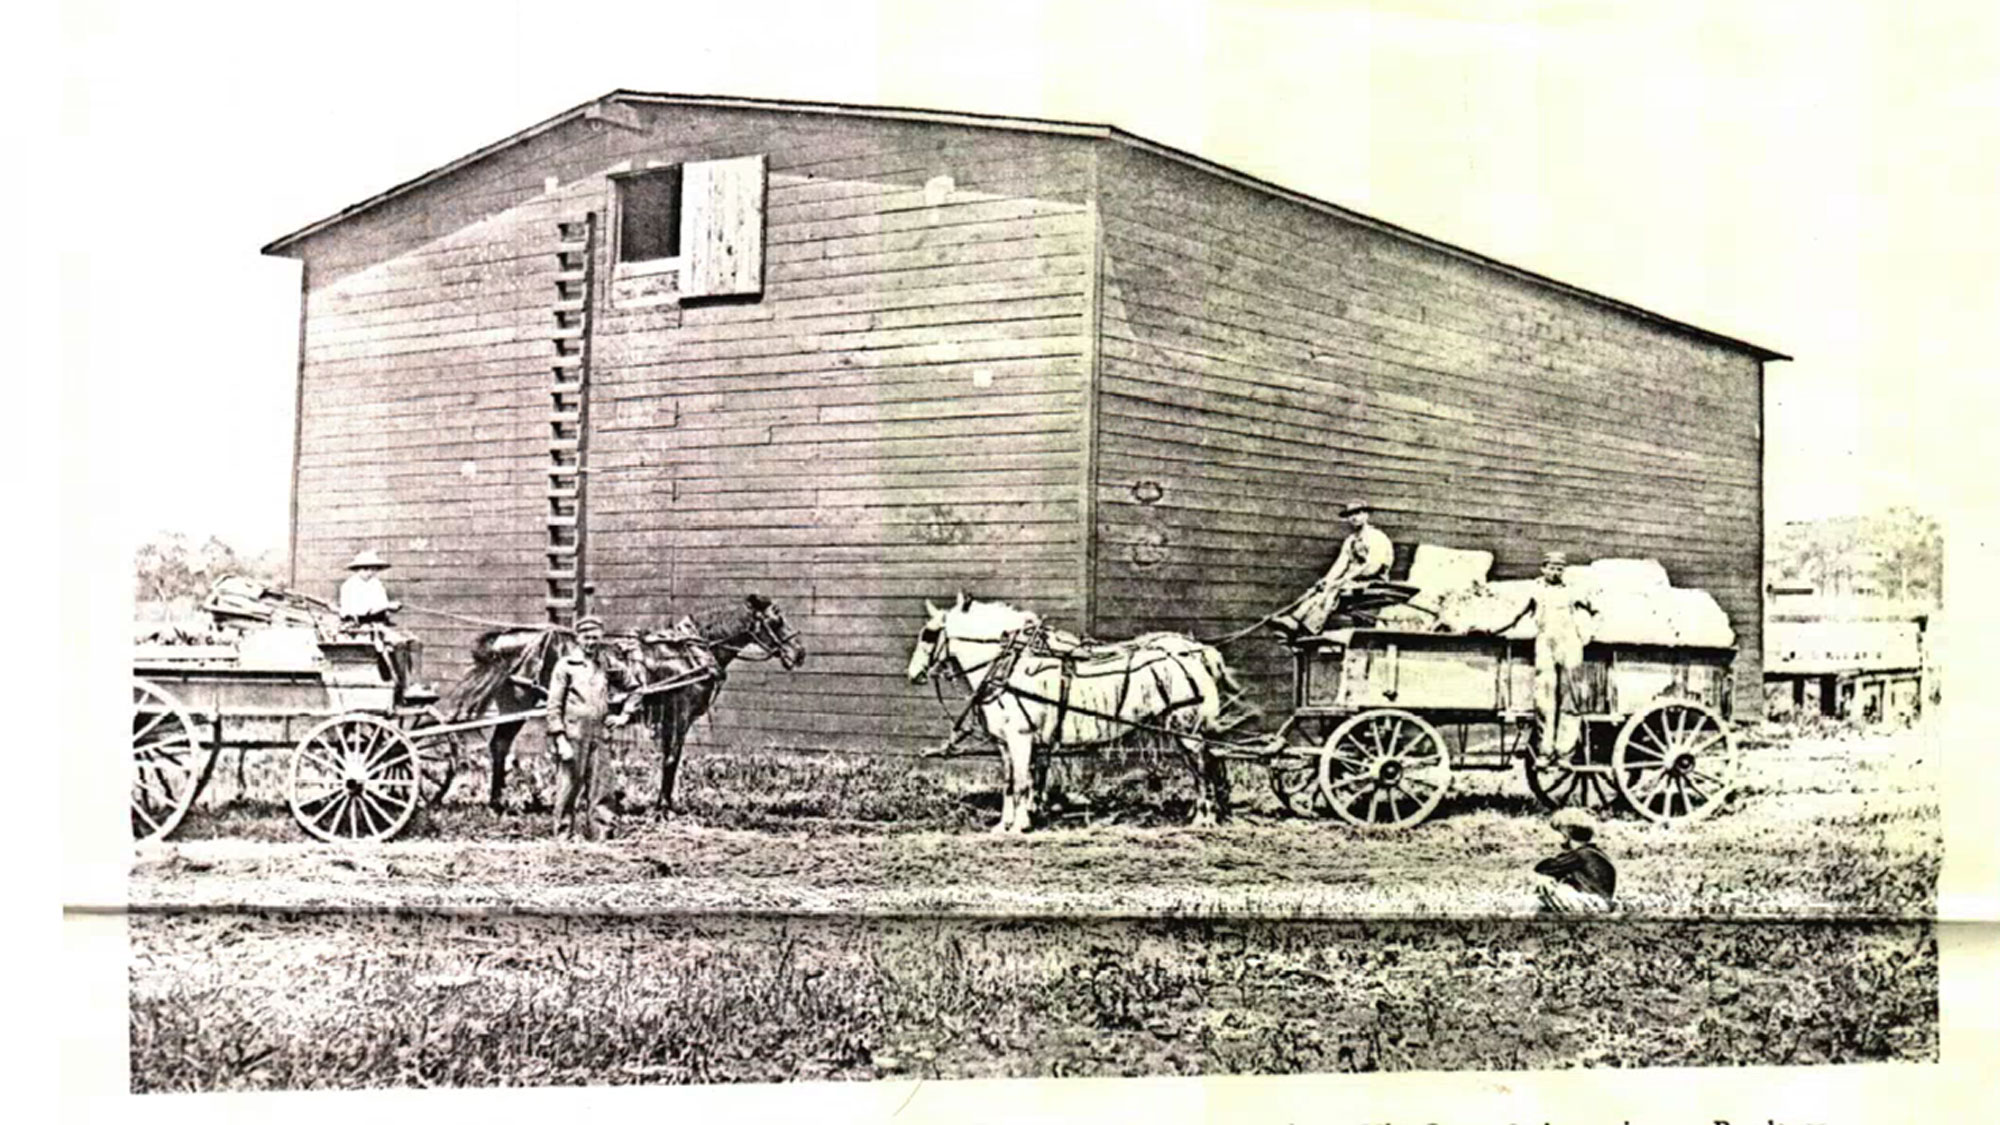 The Upton Ice House was located on Main Street in Plainfield.